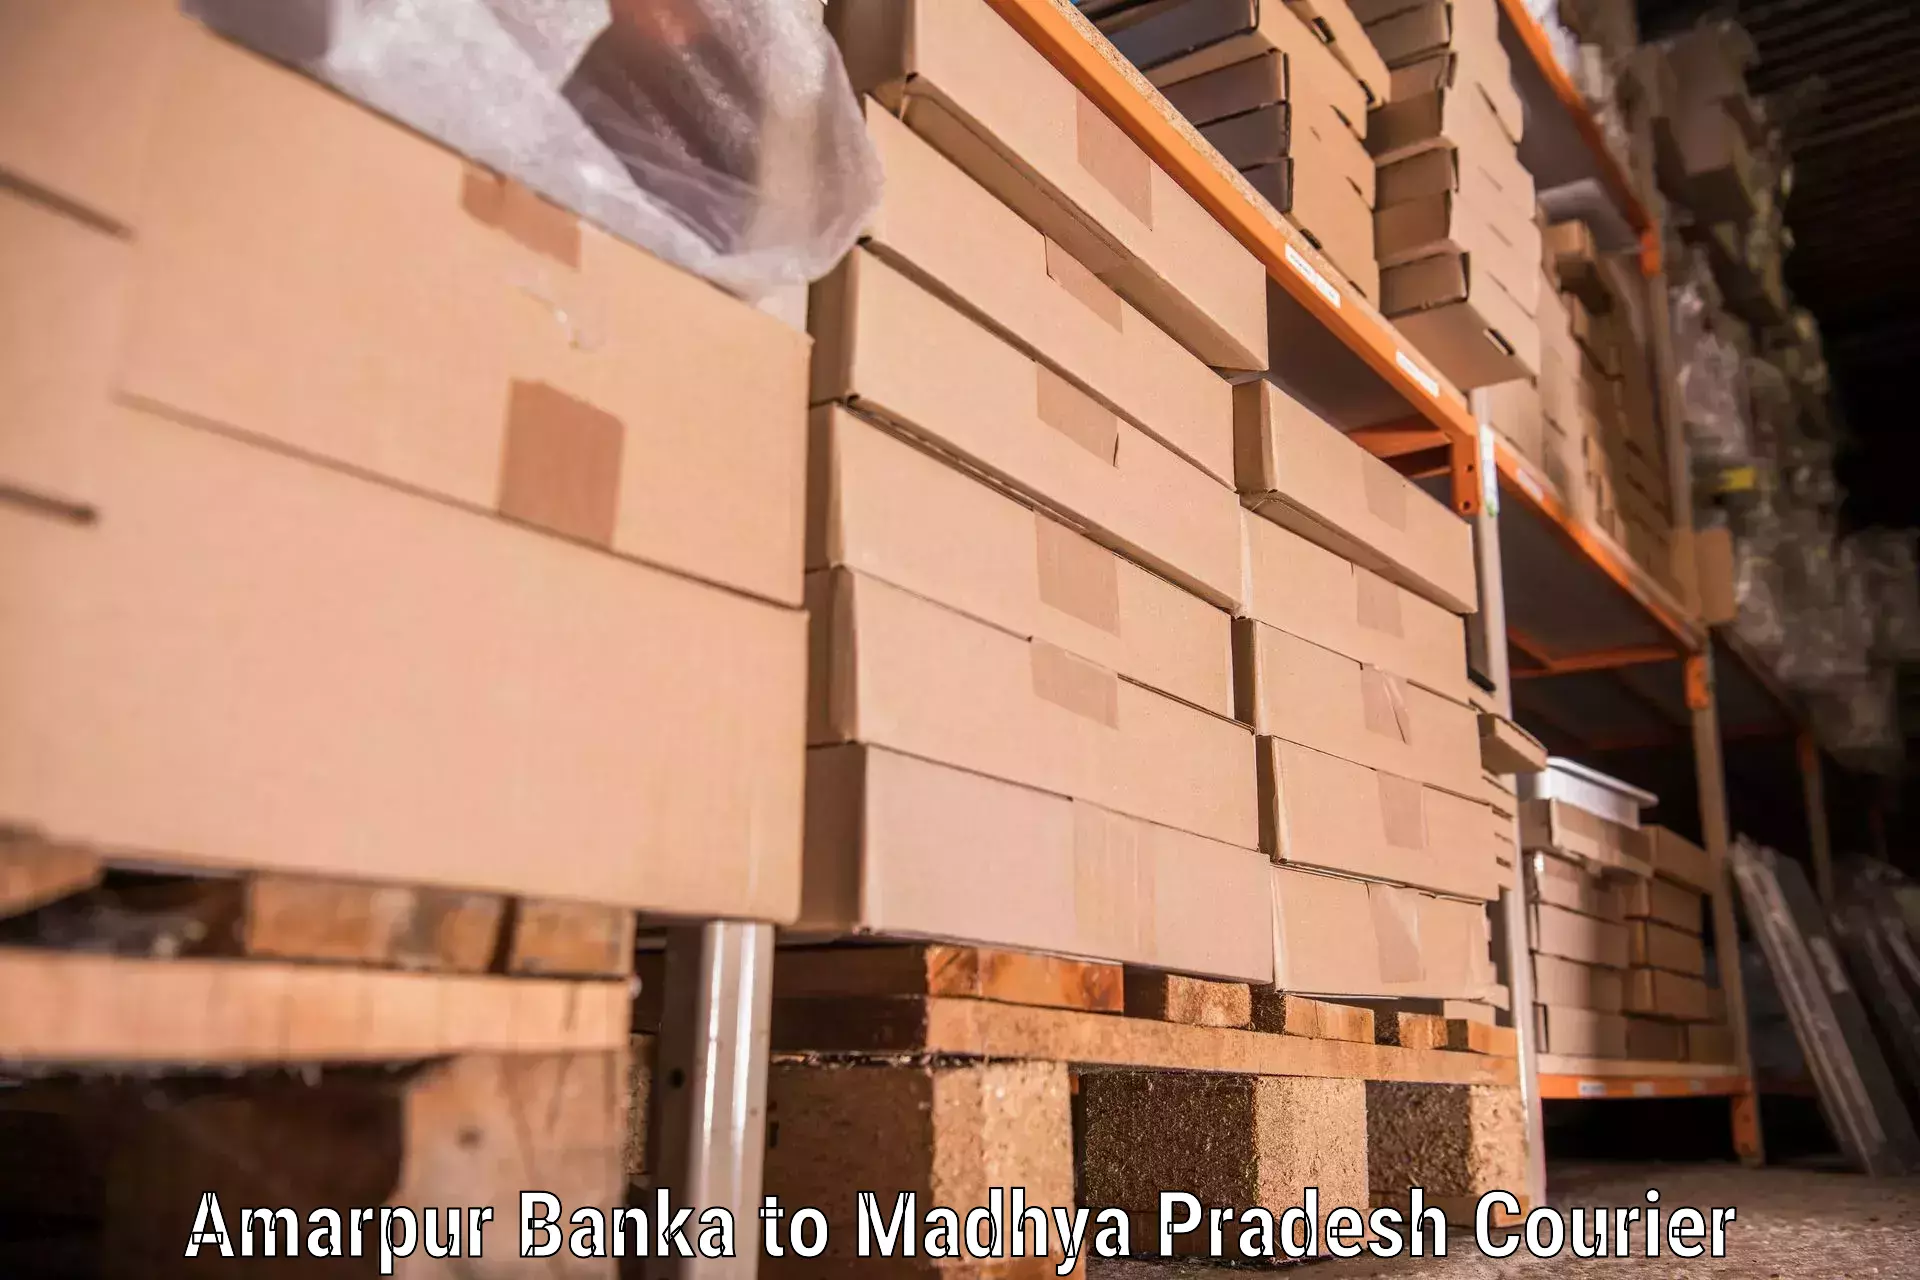 Moving and storage services Amarpur Banka to Petlawad